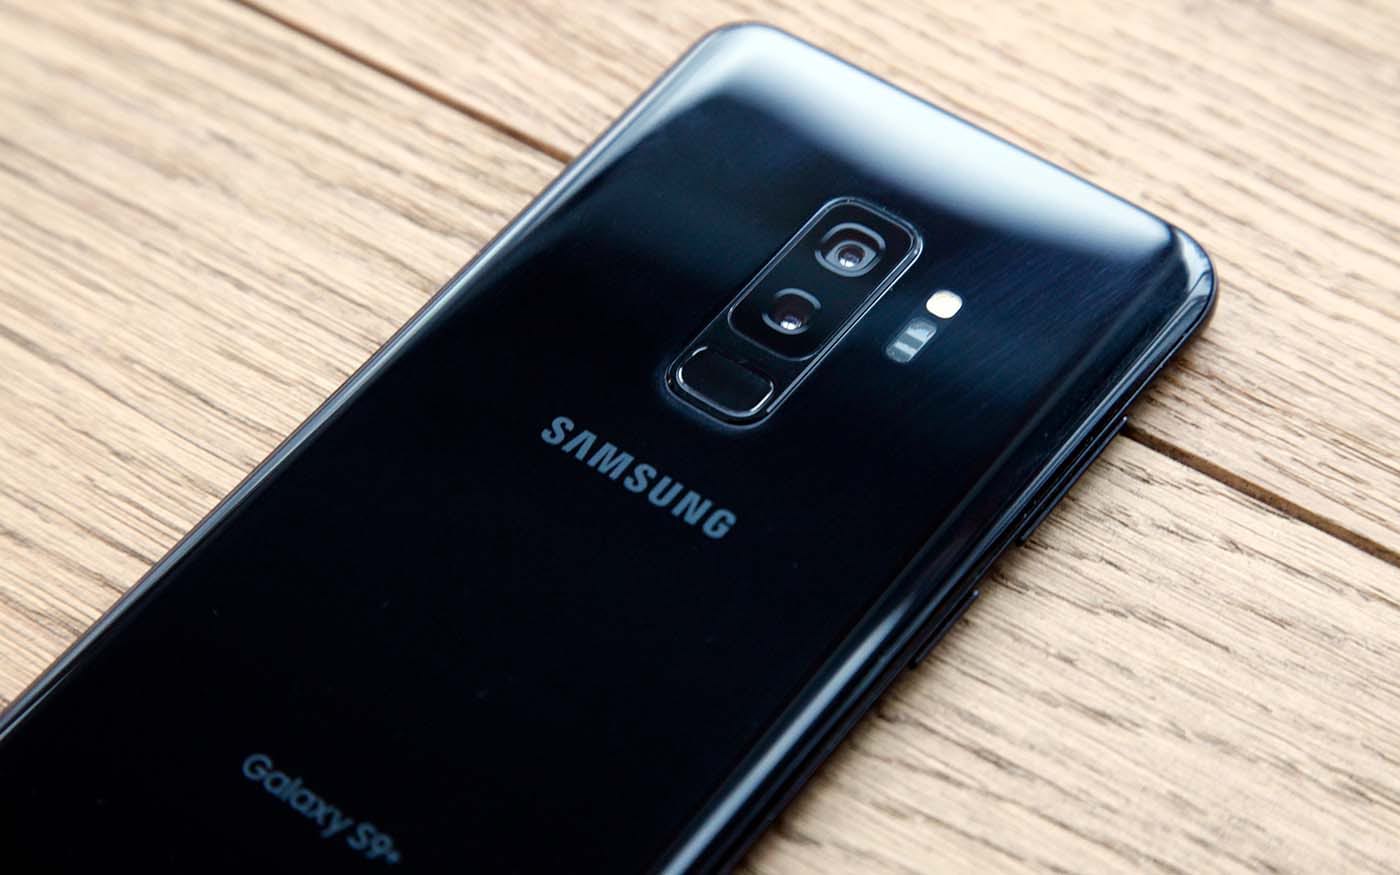 Stable version of Android 10 reaches Galaxy S9 and S9 +